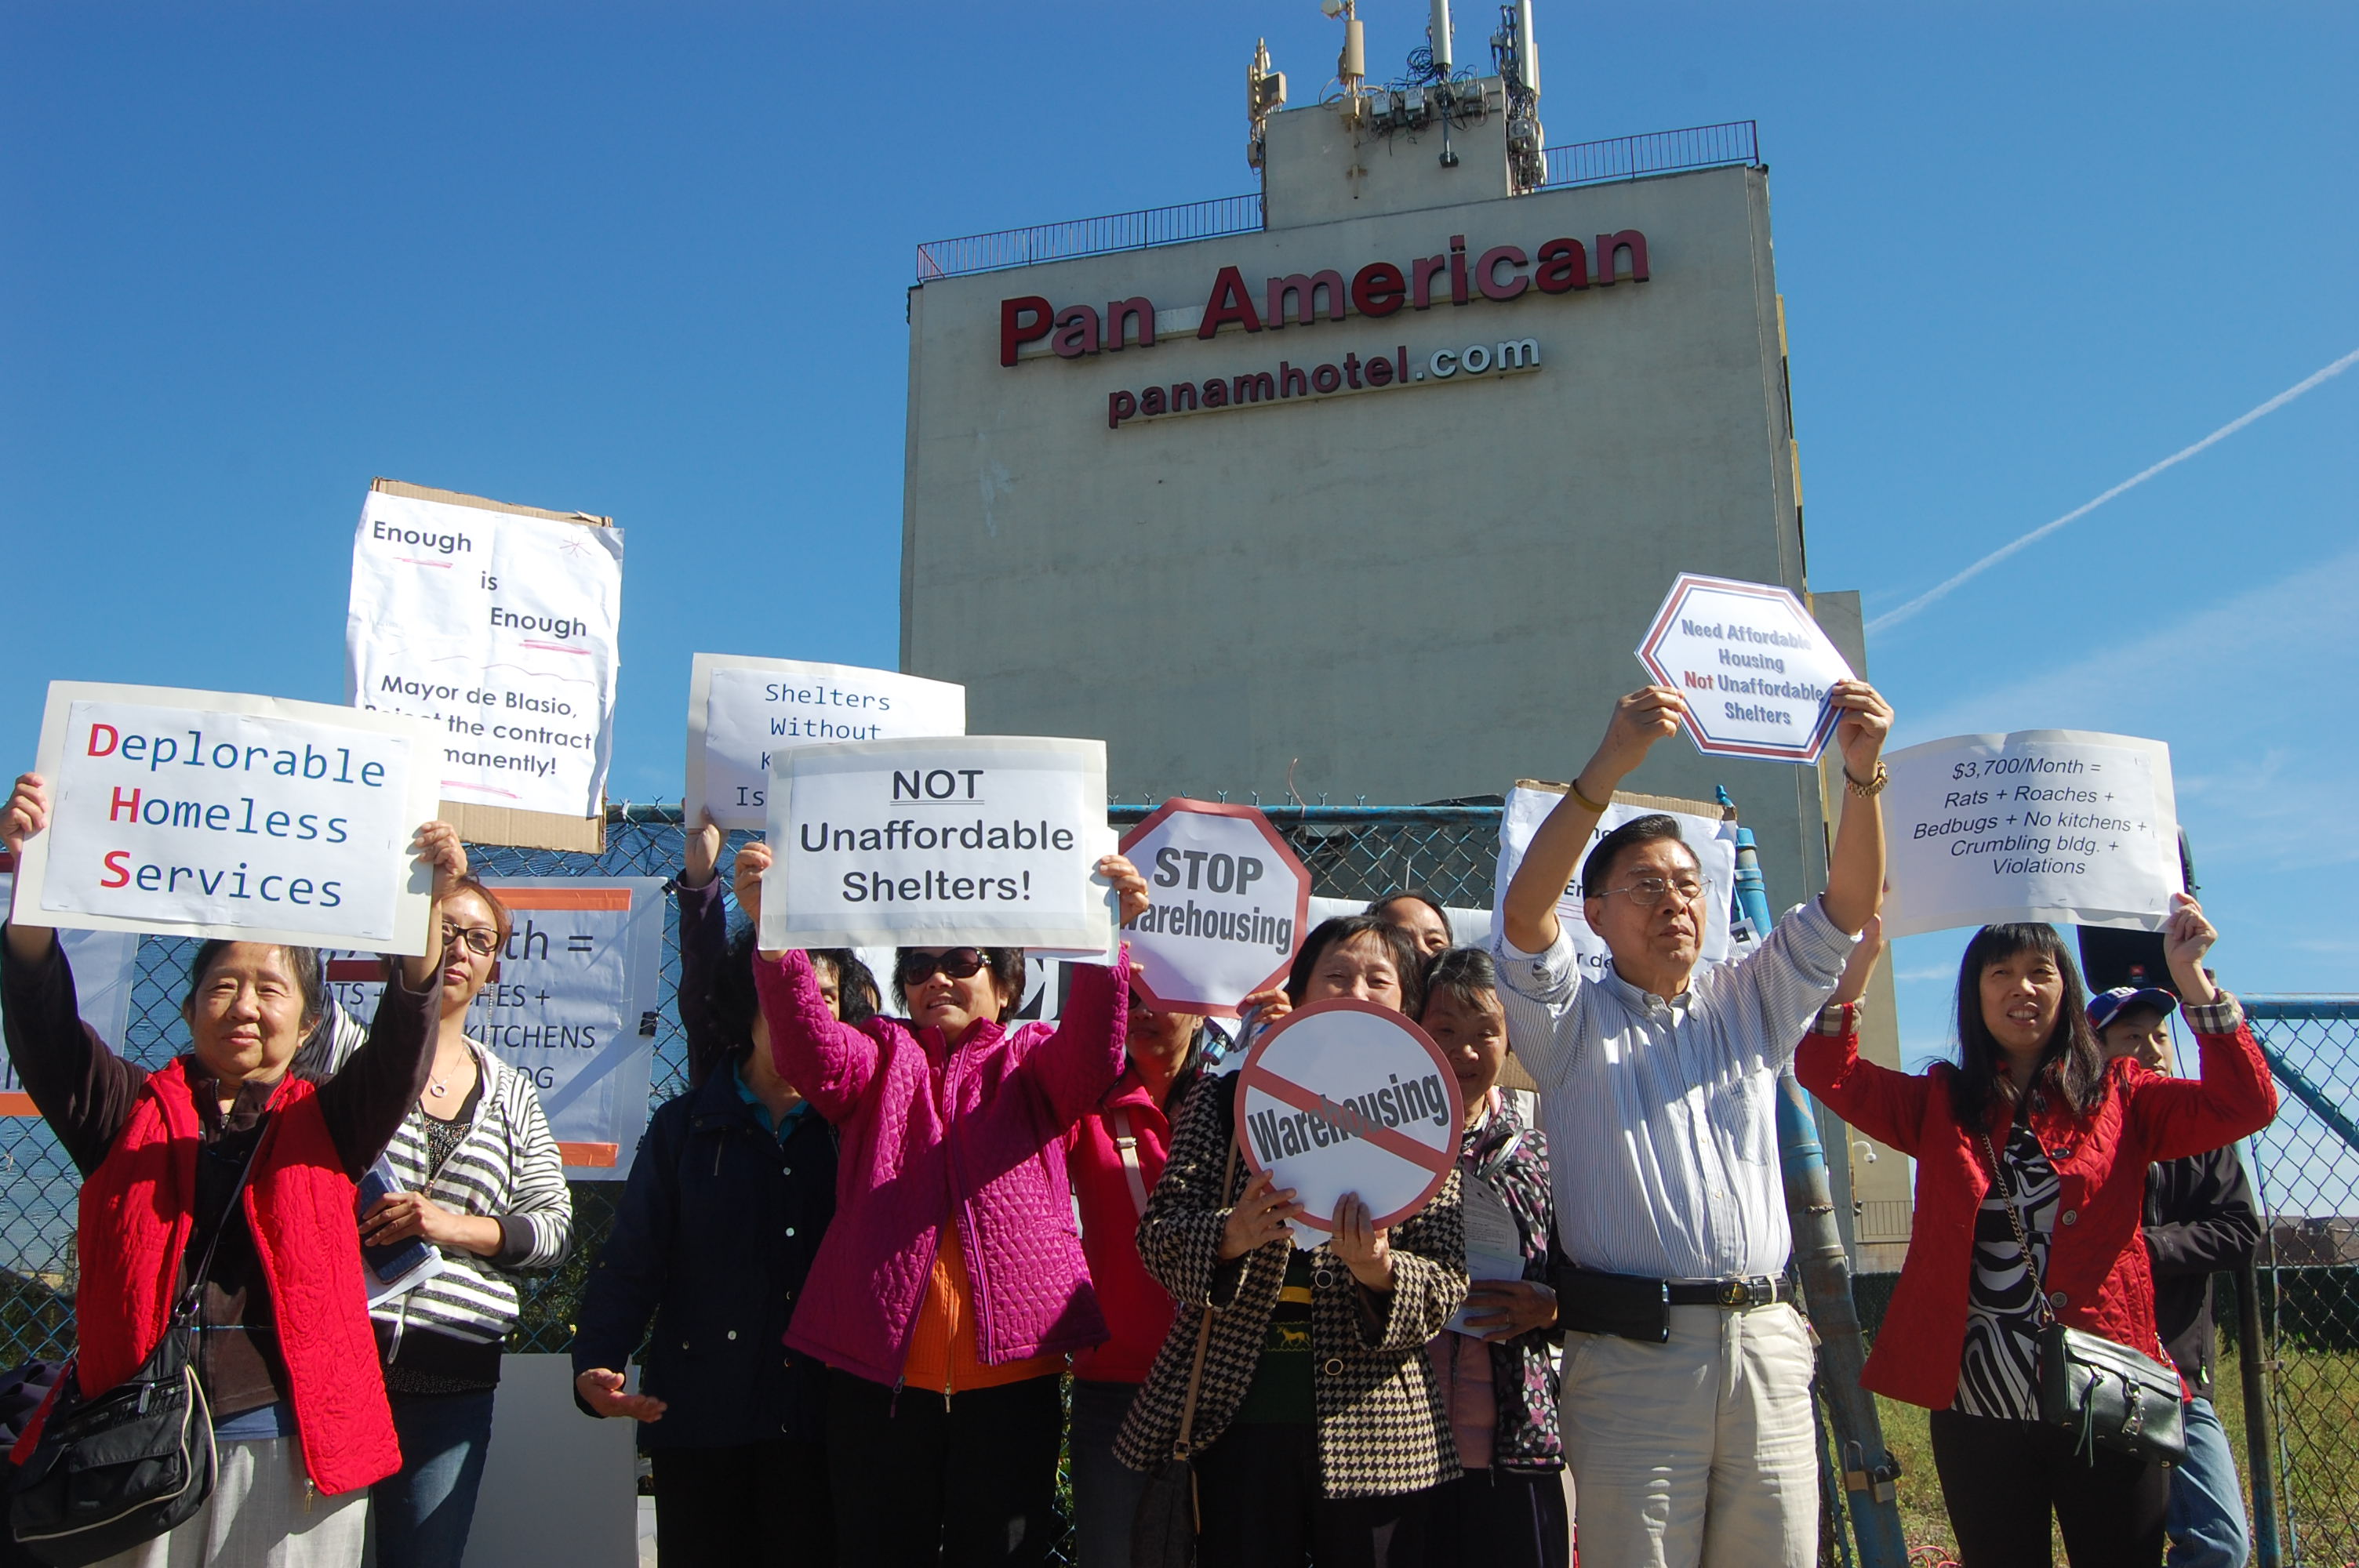 A rally against the fourth proposal to turn the Pan-American shelter into a permanent facility.